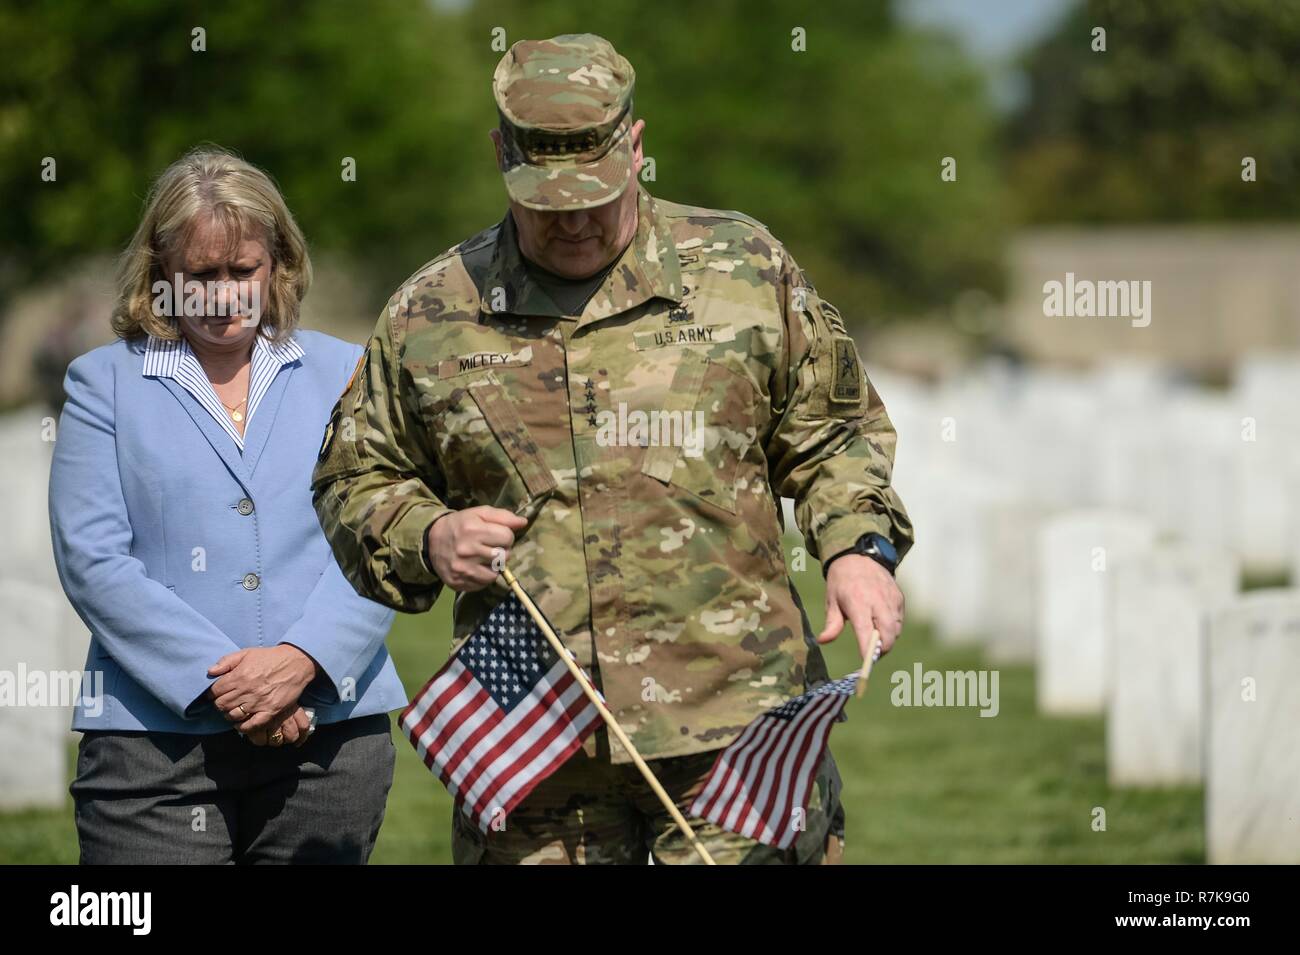 U.S. Army Chief of Staff Gen. Mark Milley and his wife Hollyanne places flags at the graves of fallen soldiers during Memorial Day at Arlington National Cemetery May 26, 2016 in Arlington, Virginia. Milley was chosen by President Donald Trump on December 8, 2018 to be the next Chairman of the Joint Chiefs. Stock Photo